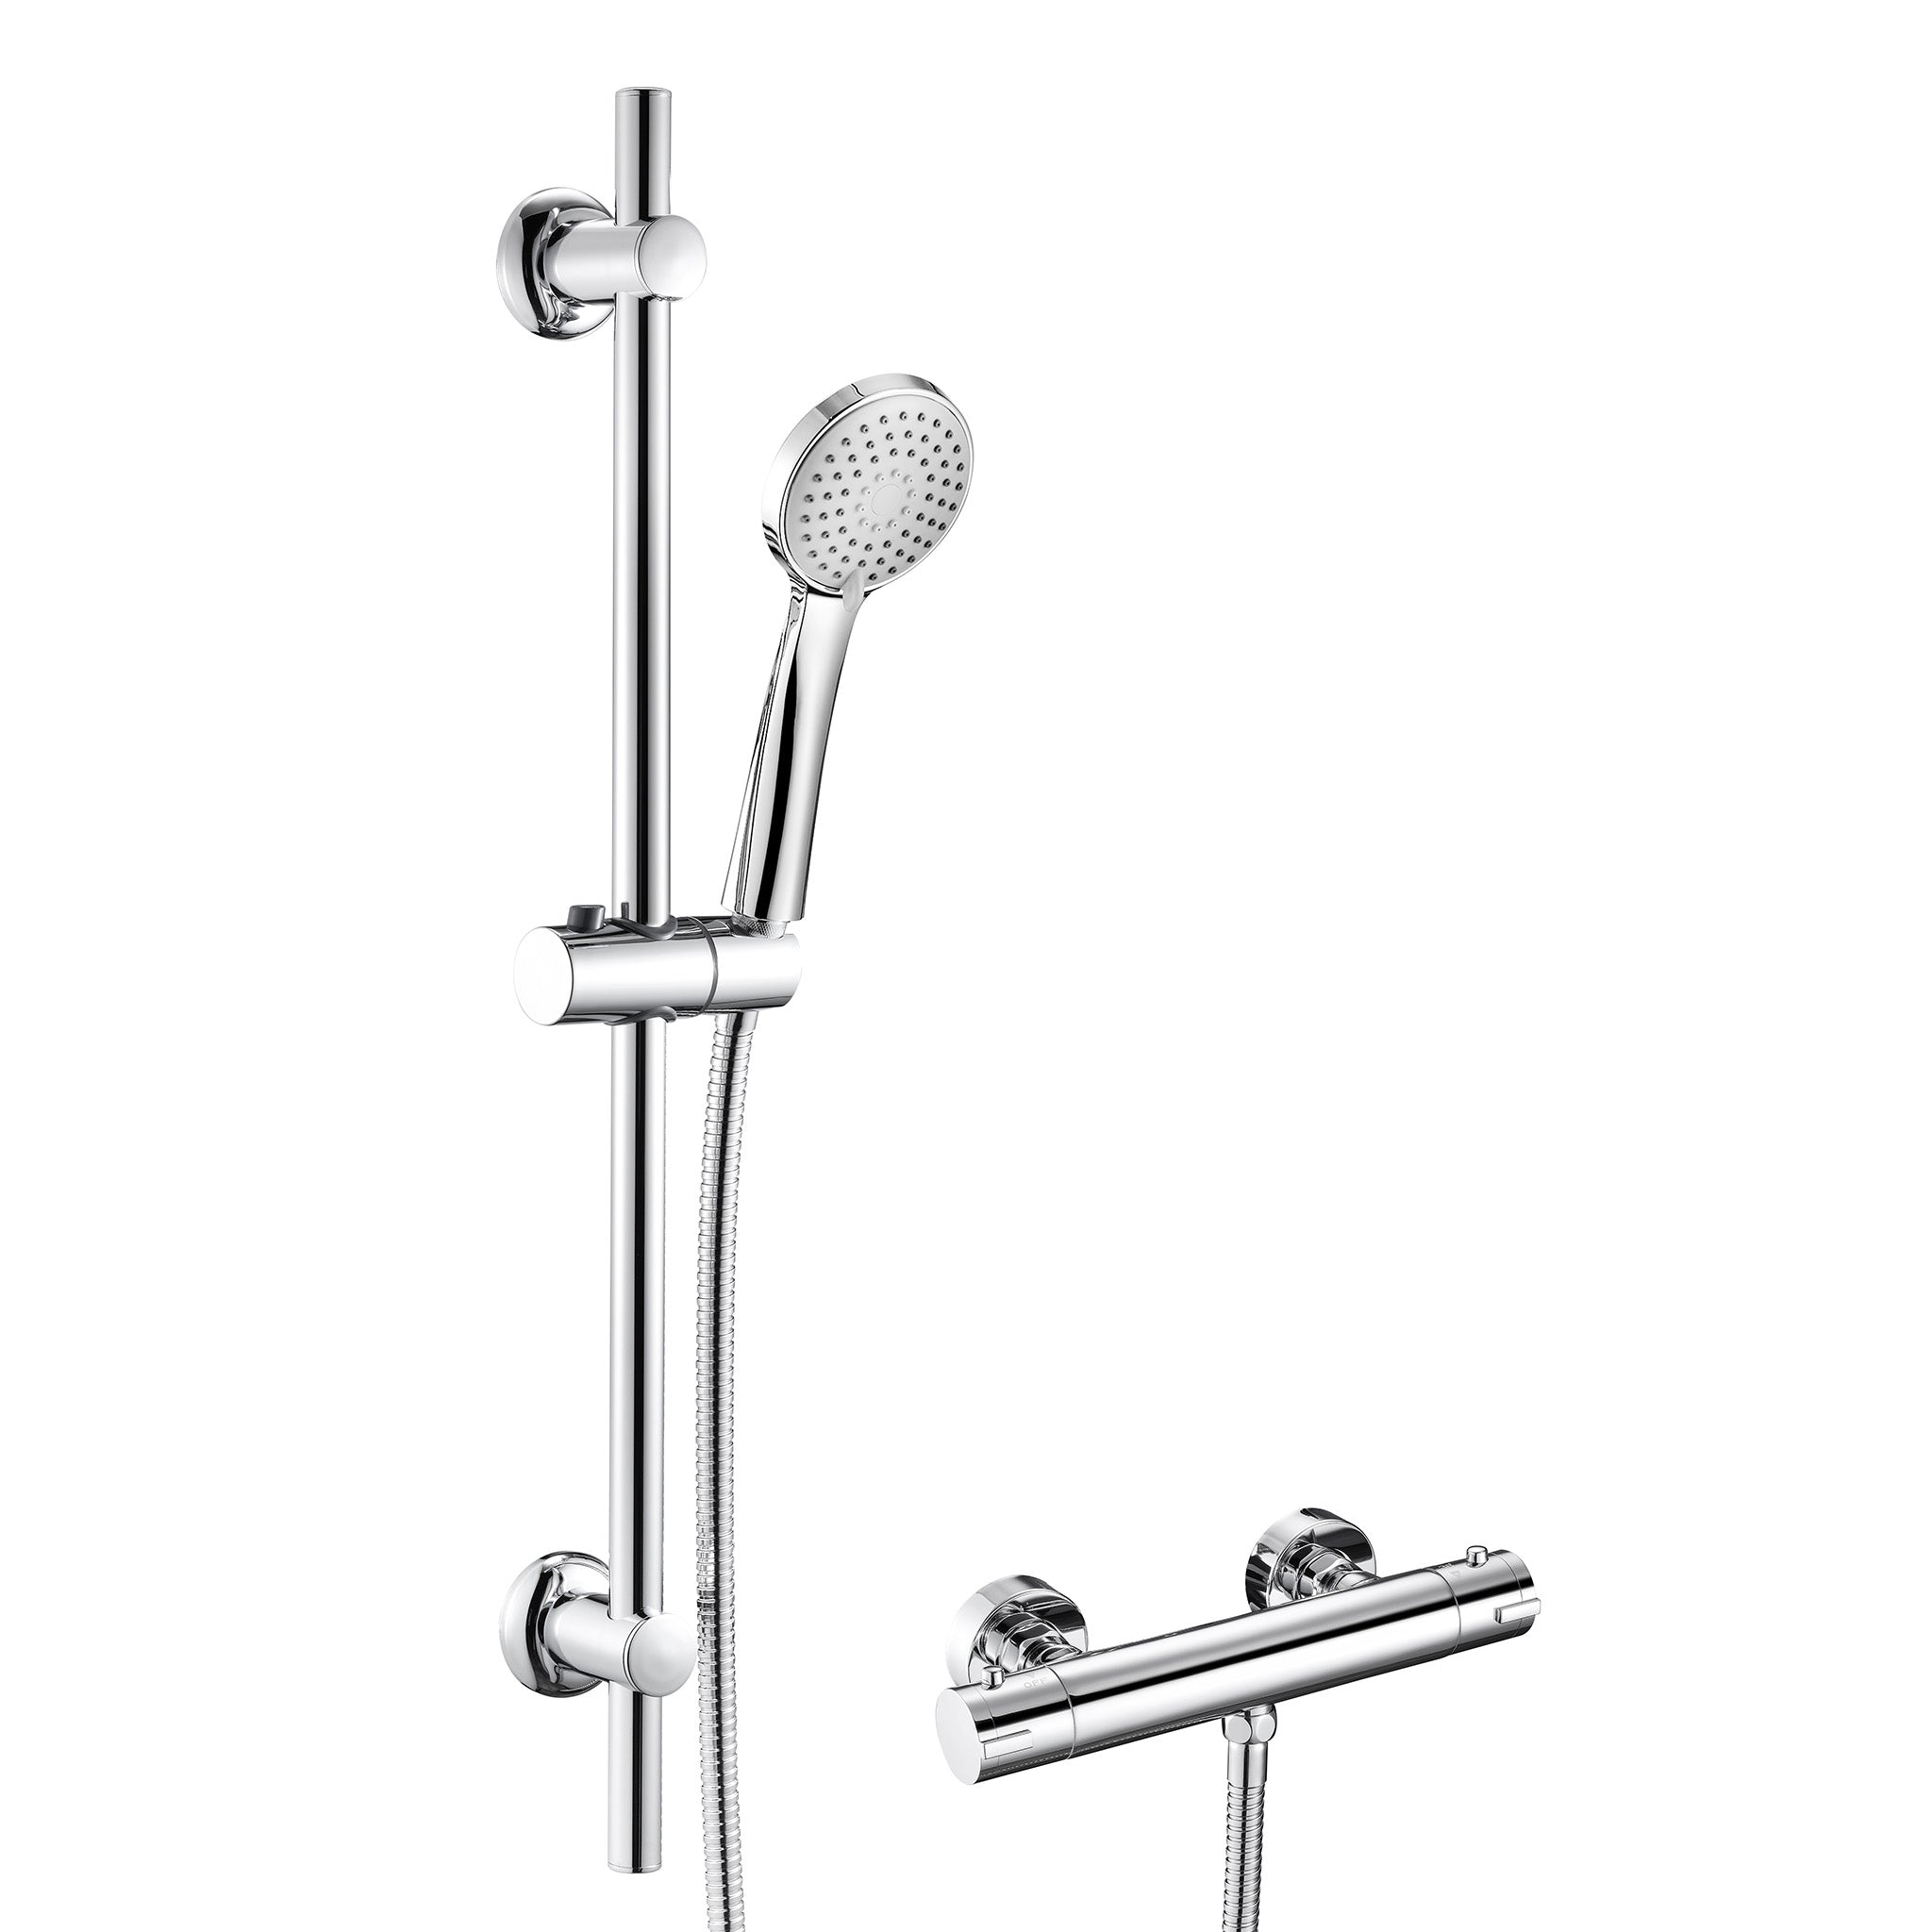 MyStyle Avon Thermostatic Exposed Shower System